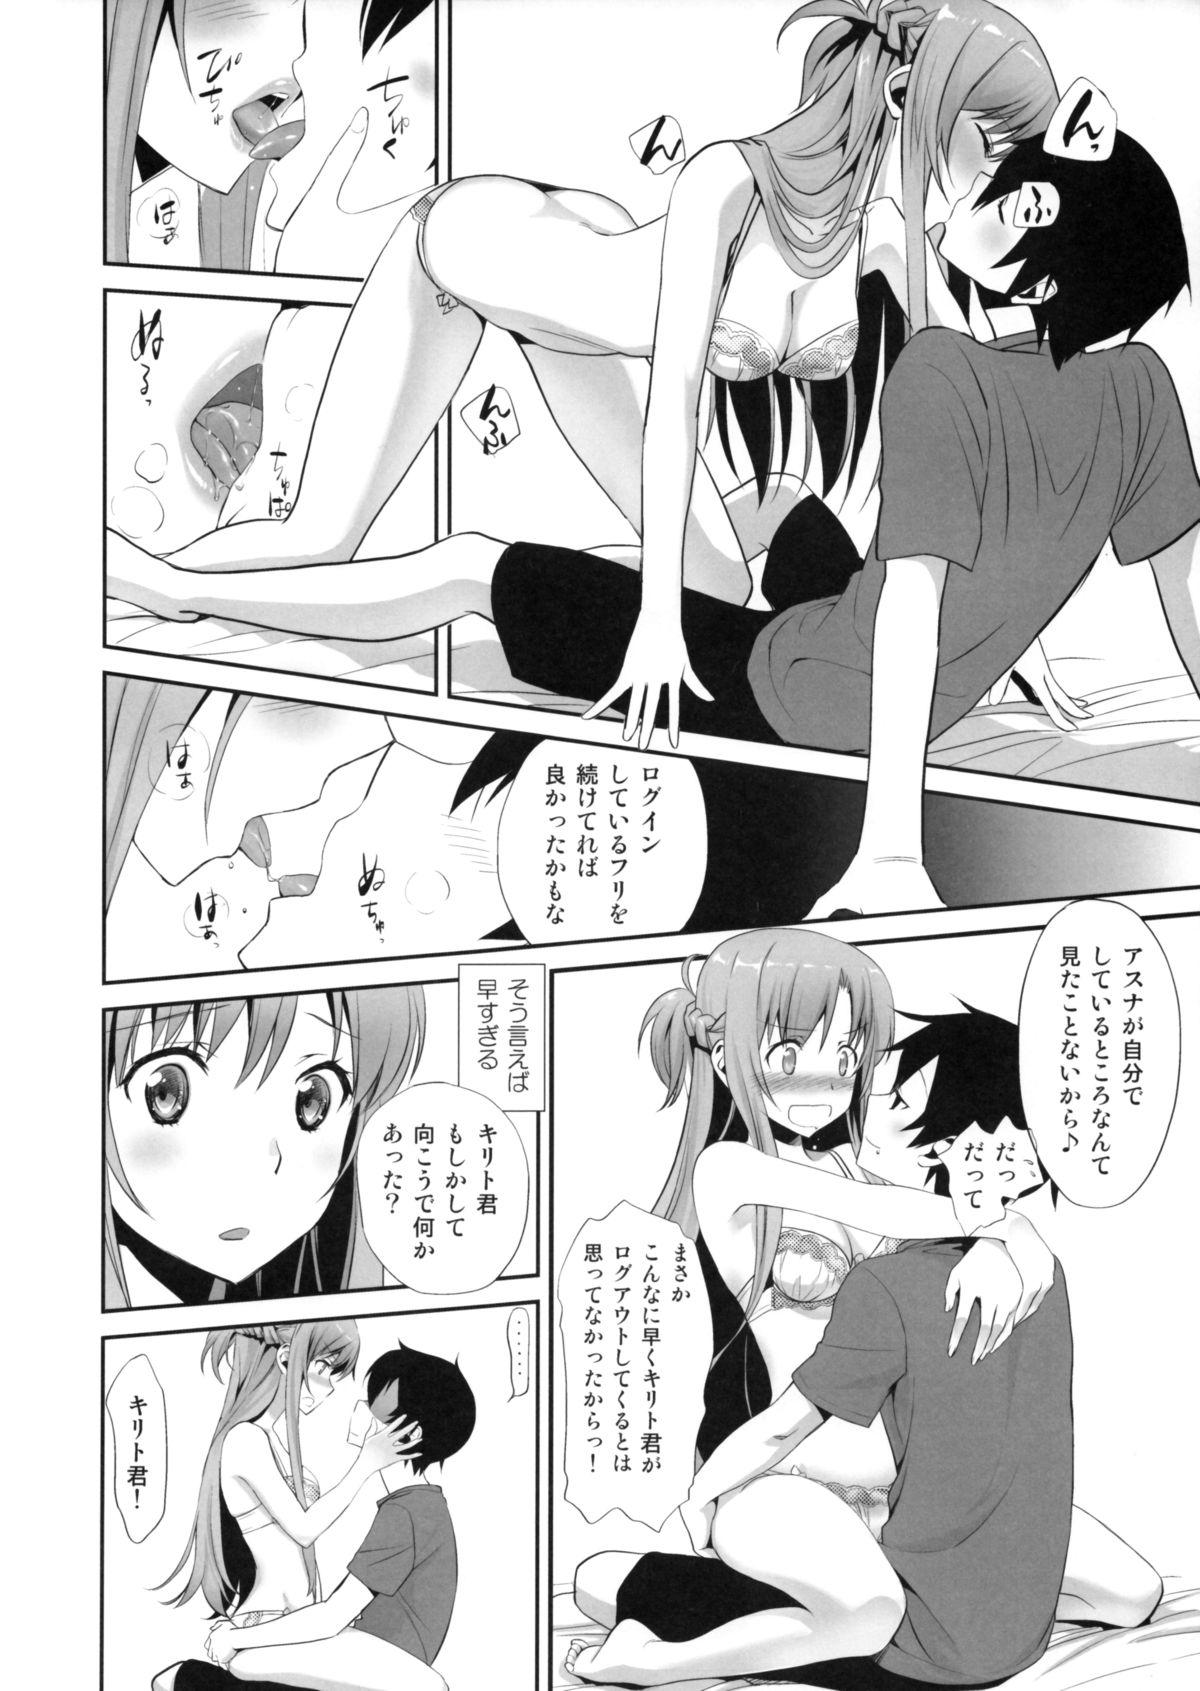 Milfsex Sunny-side up? - Sword art online Family Sex - Page 11